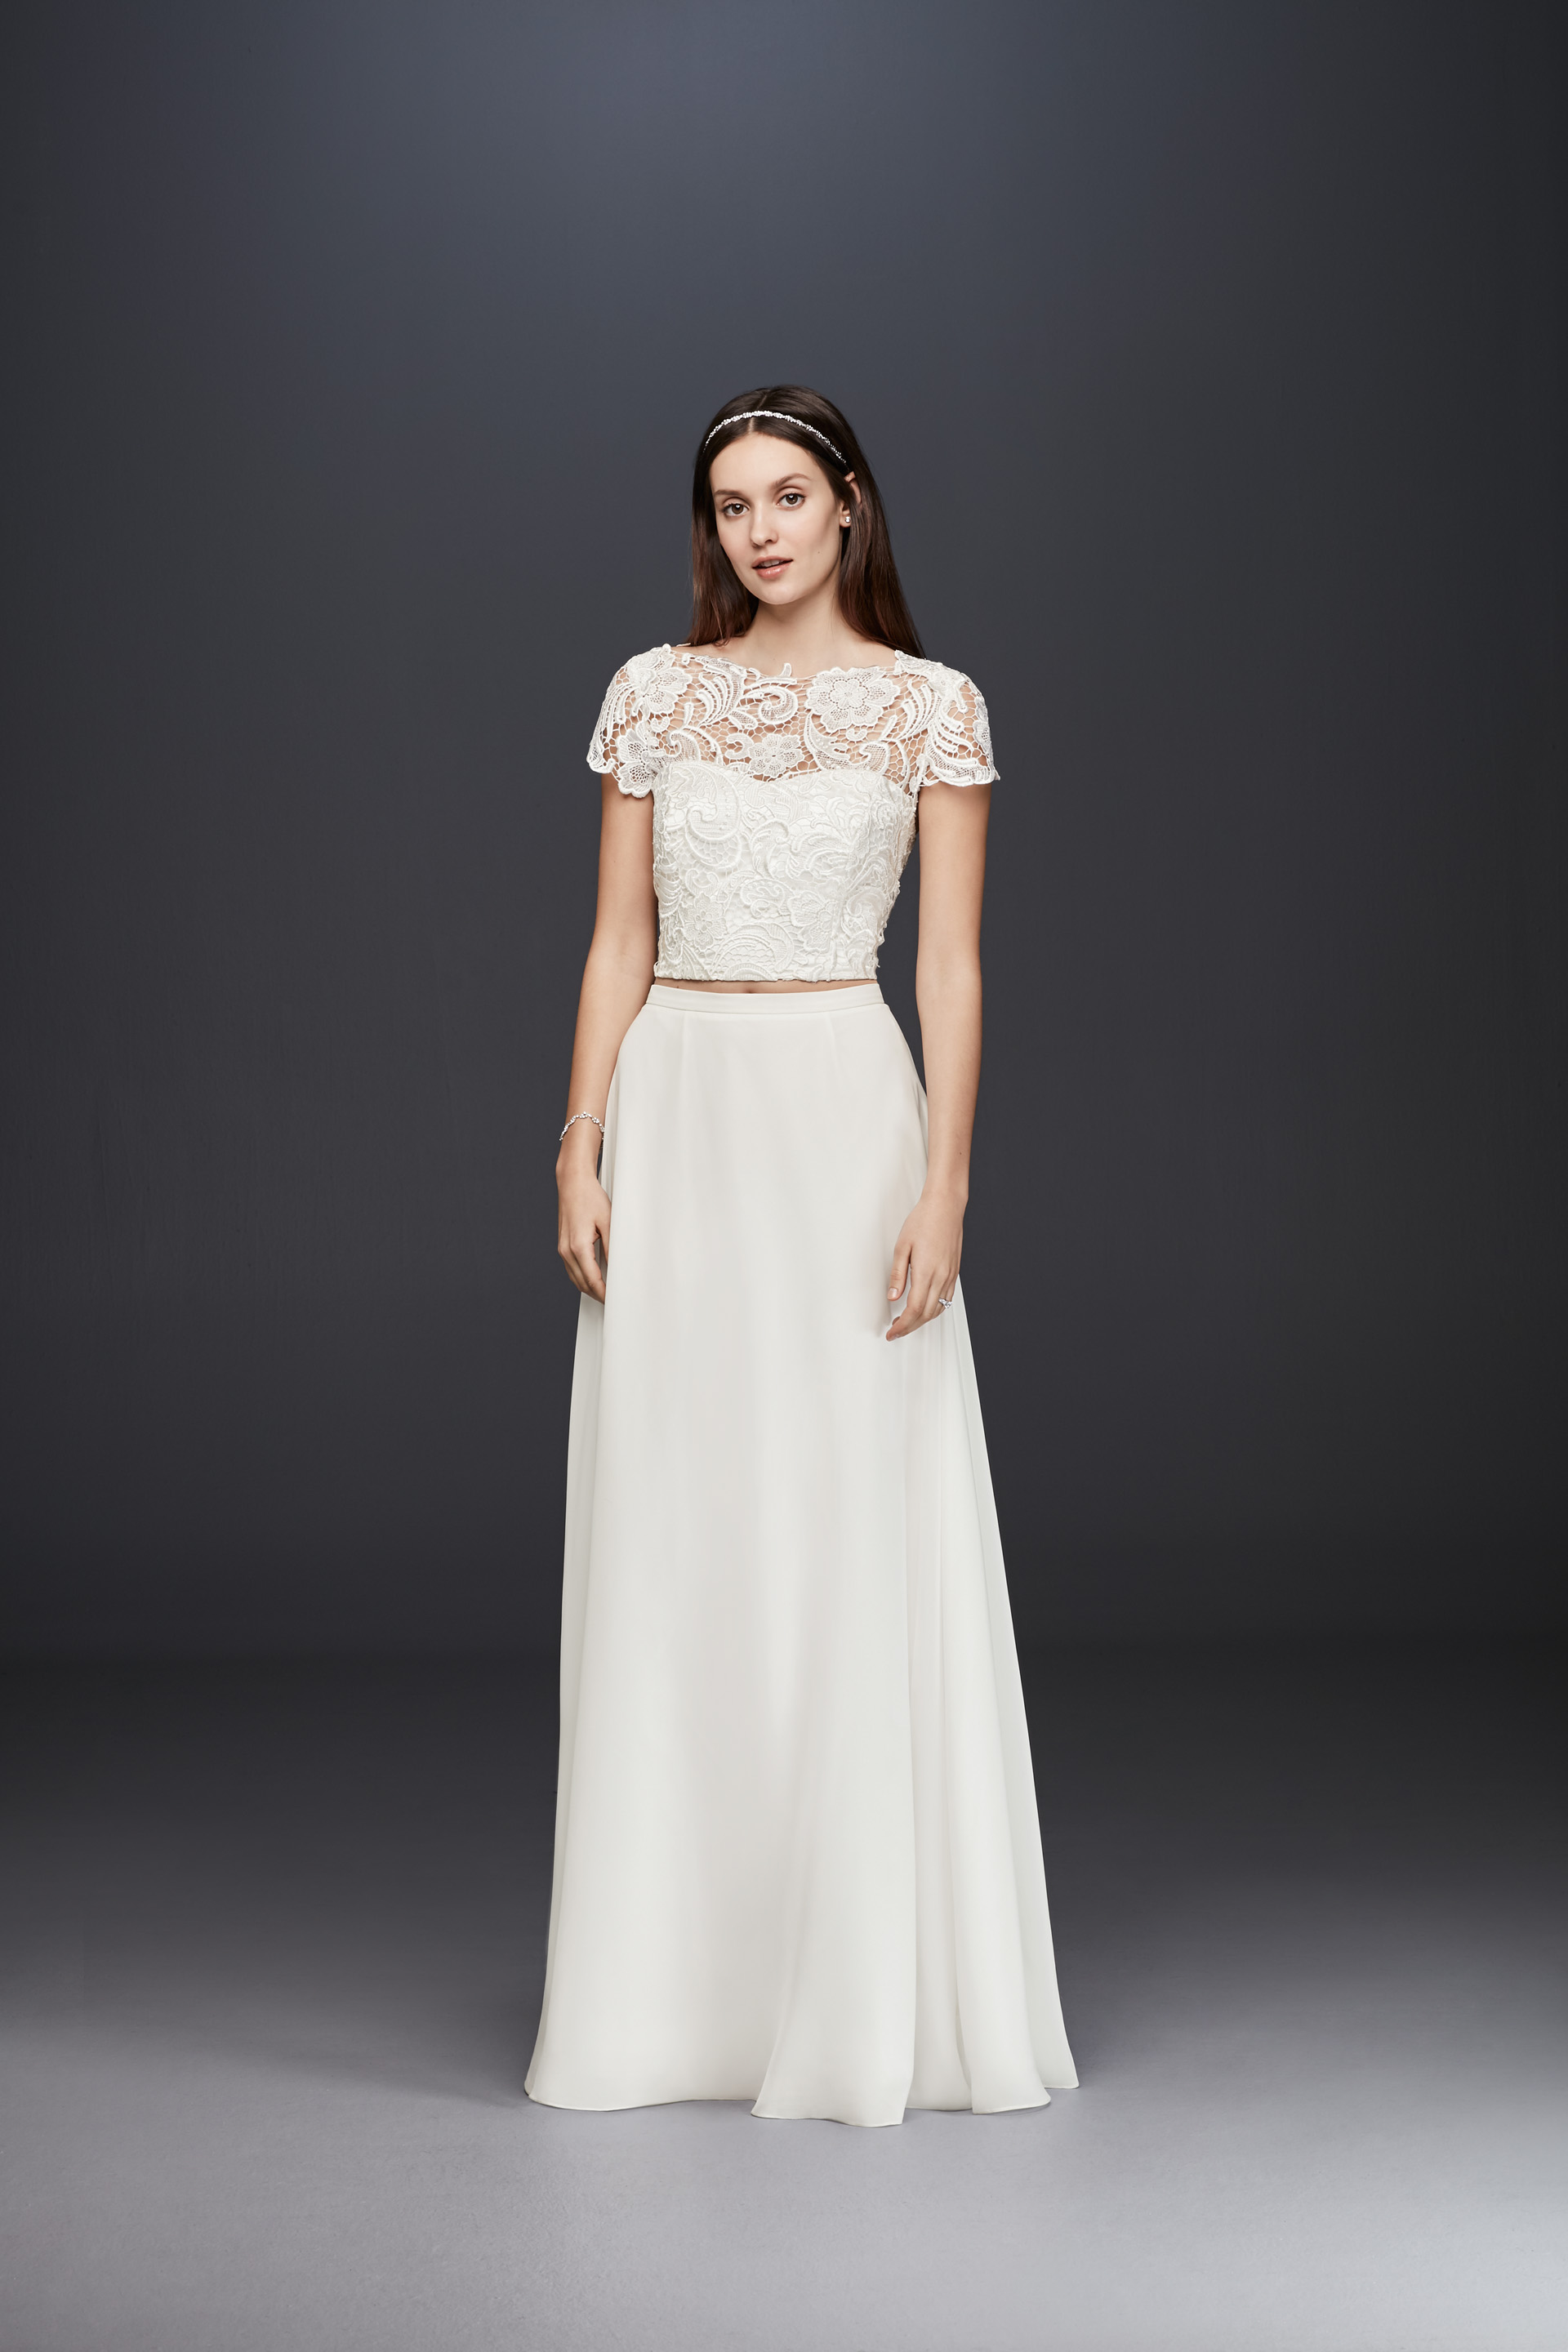 Lace cap sleeve crop top dress for a look inspired by Pippa Middleton's wedding dress. See more Pippa inspired wedding dresses on the David's Bridal blog.